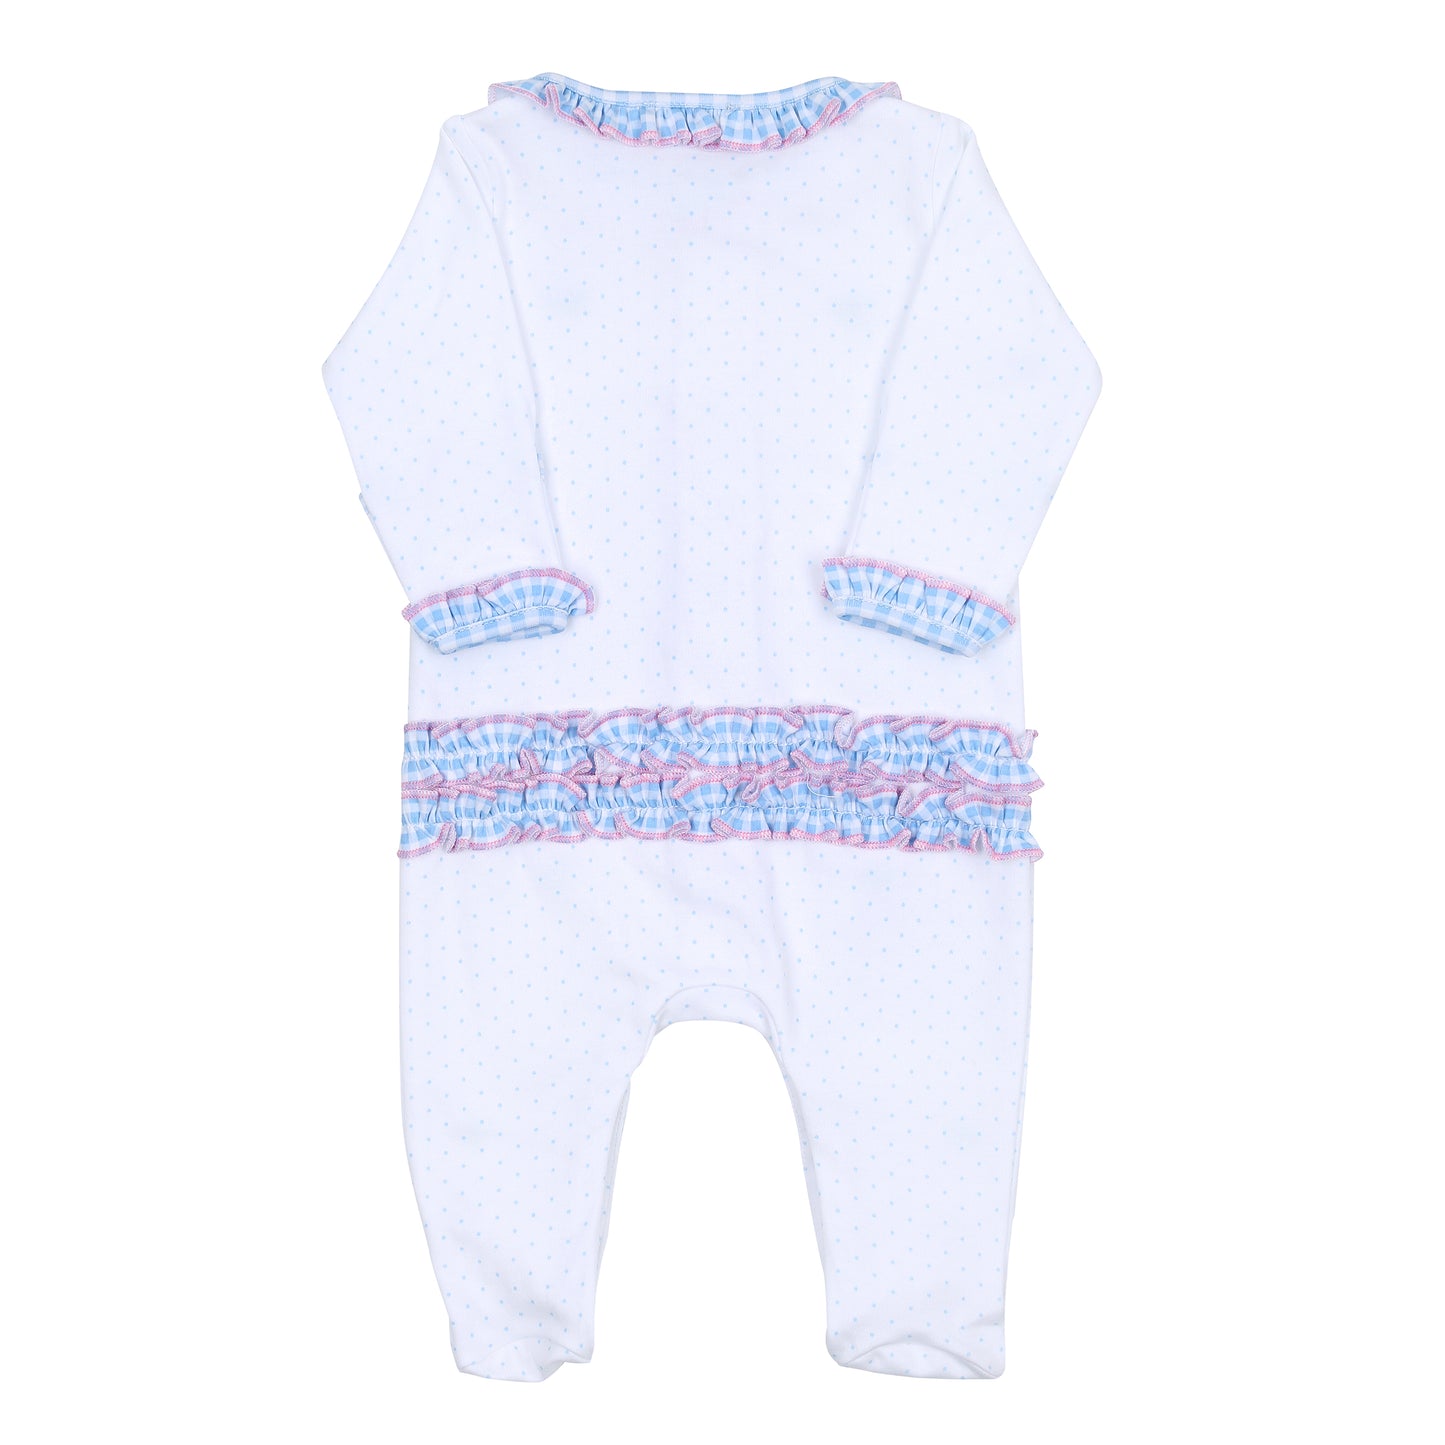 Anna's Classics Sky Blue Smocked Scattered Ruffle Footie